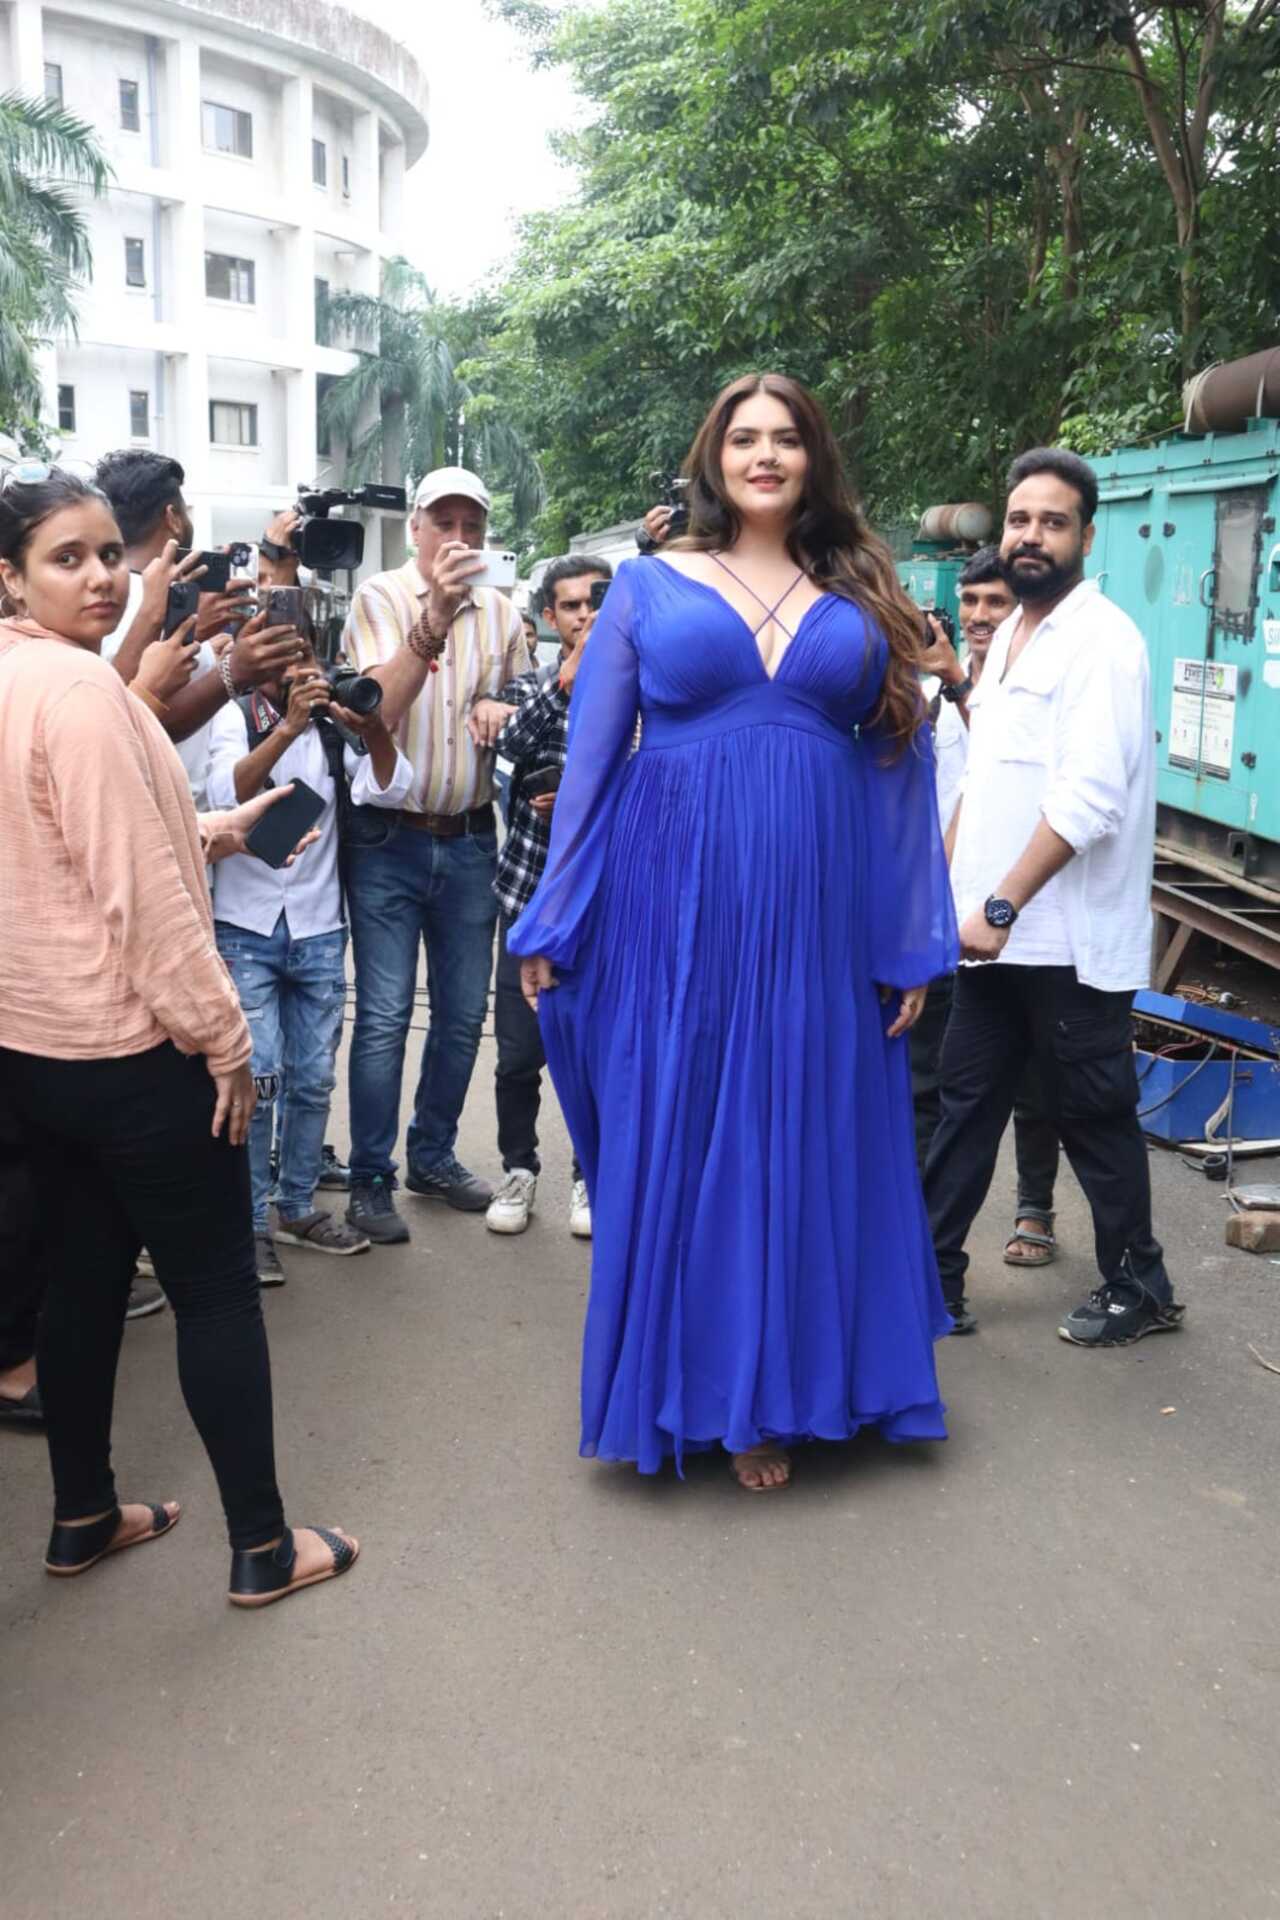 Anjali Anand was seen on the set. She wore a blue gown